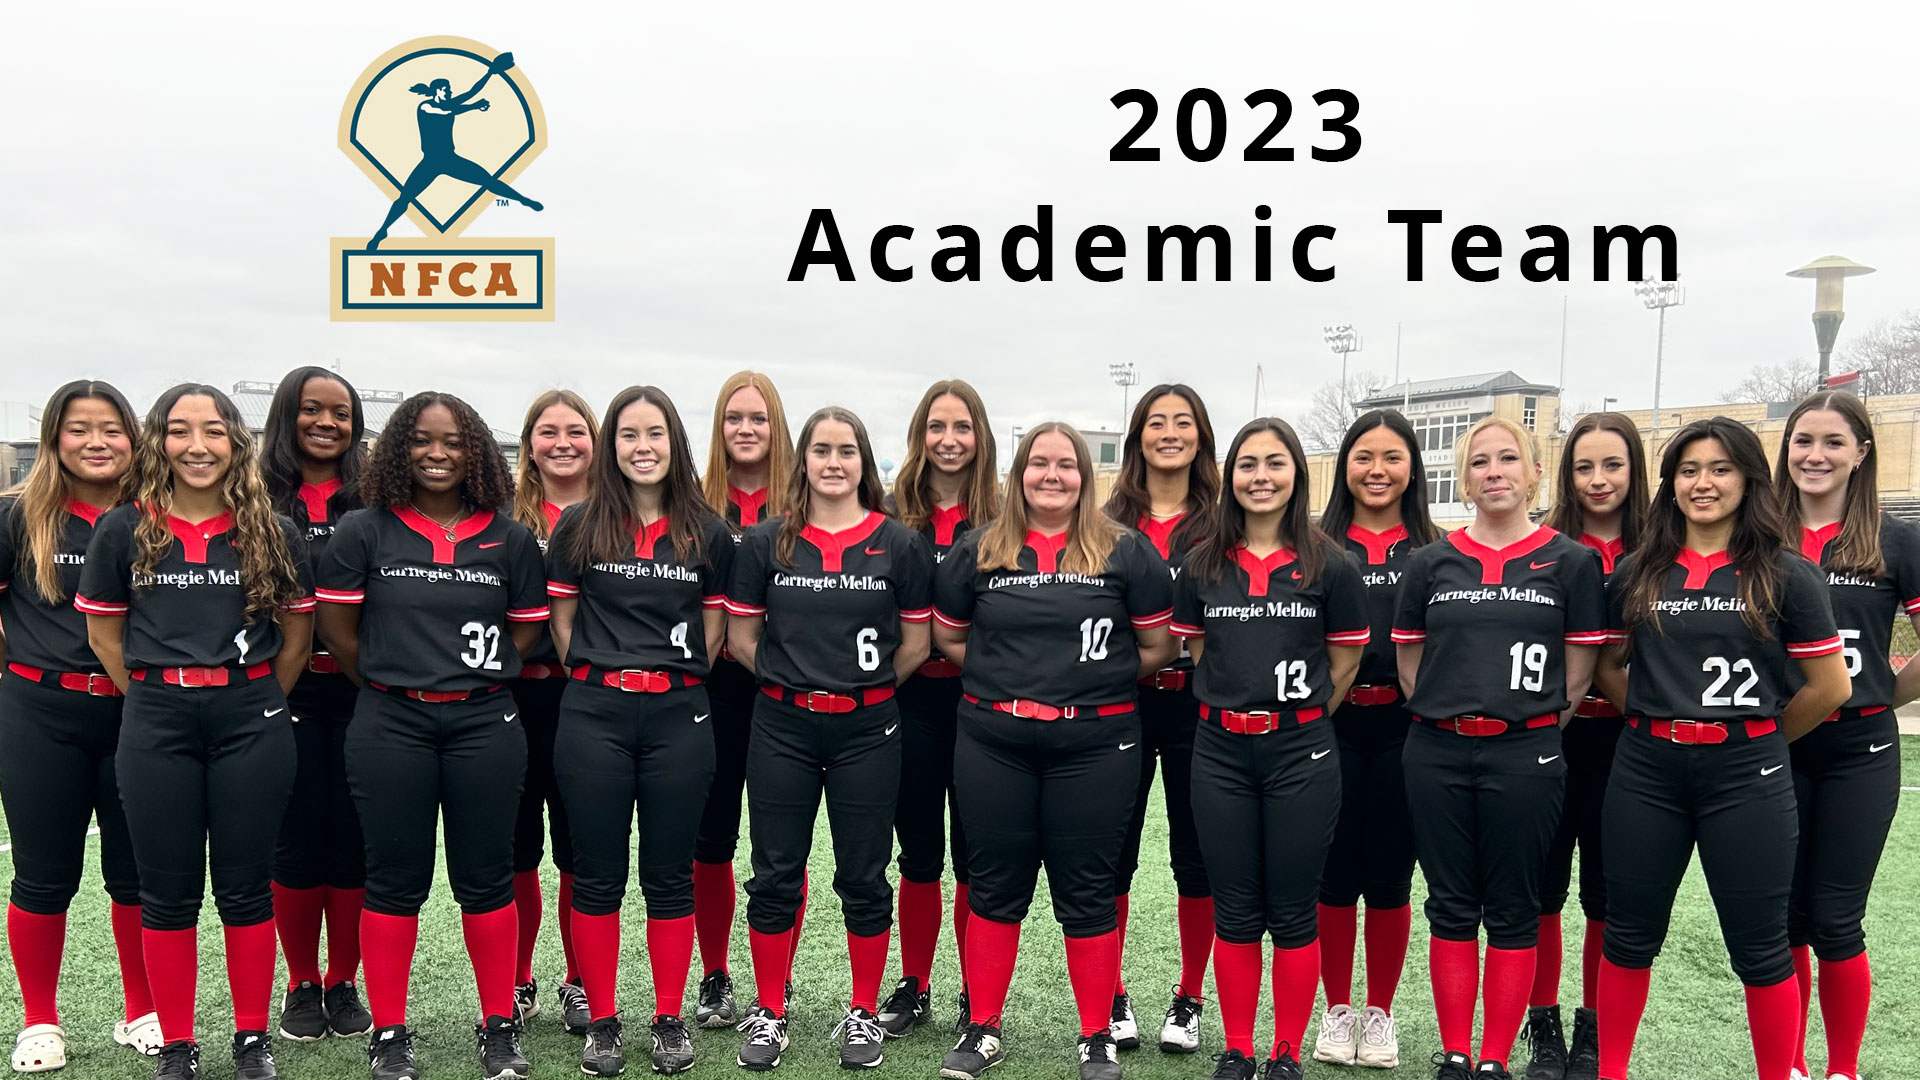 team photo of softball players standing in two rows with NFCA logo and text reading 2023 Academic Team